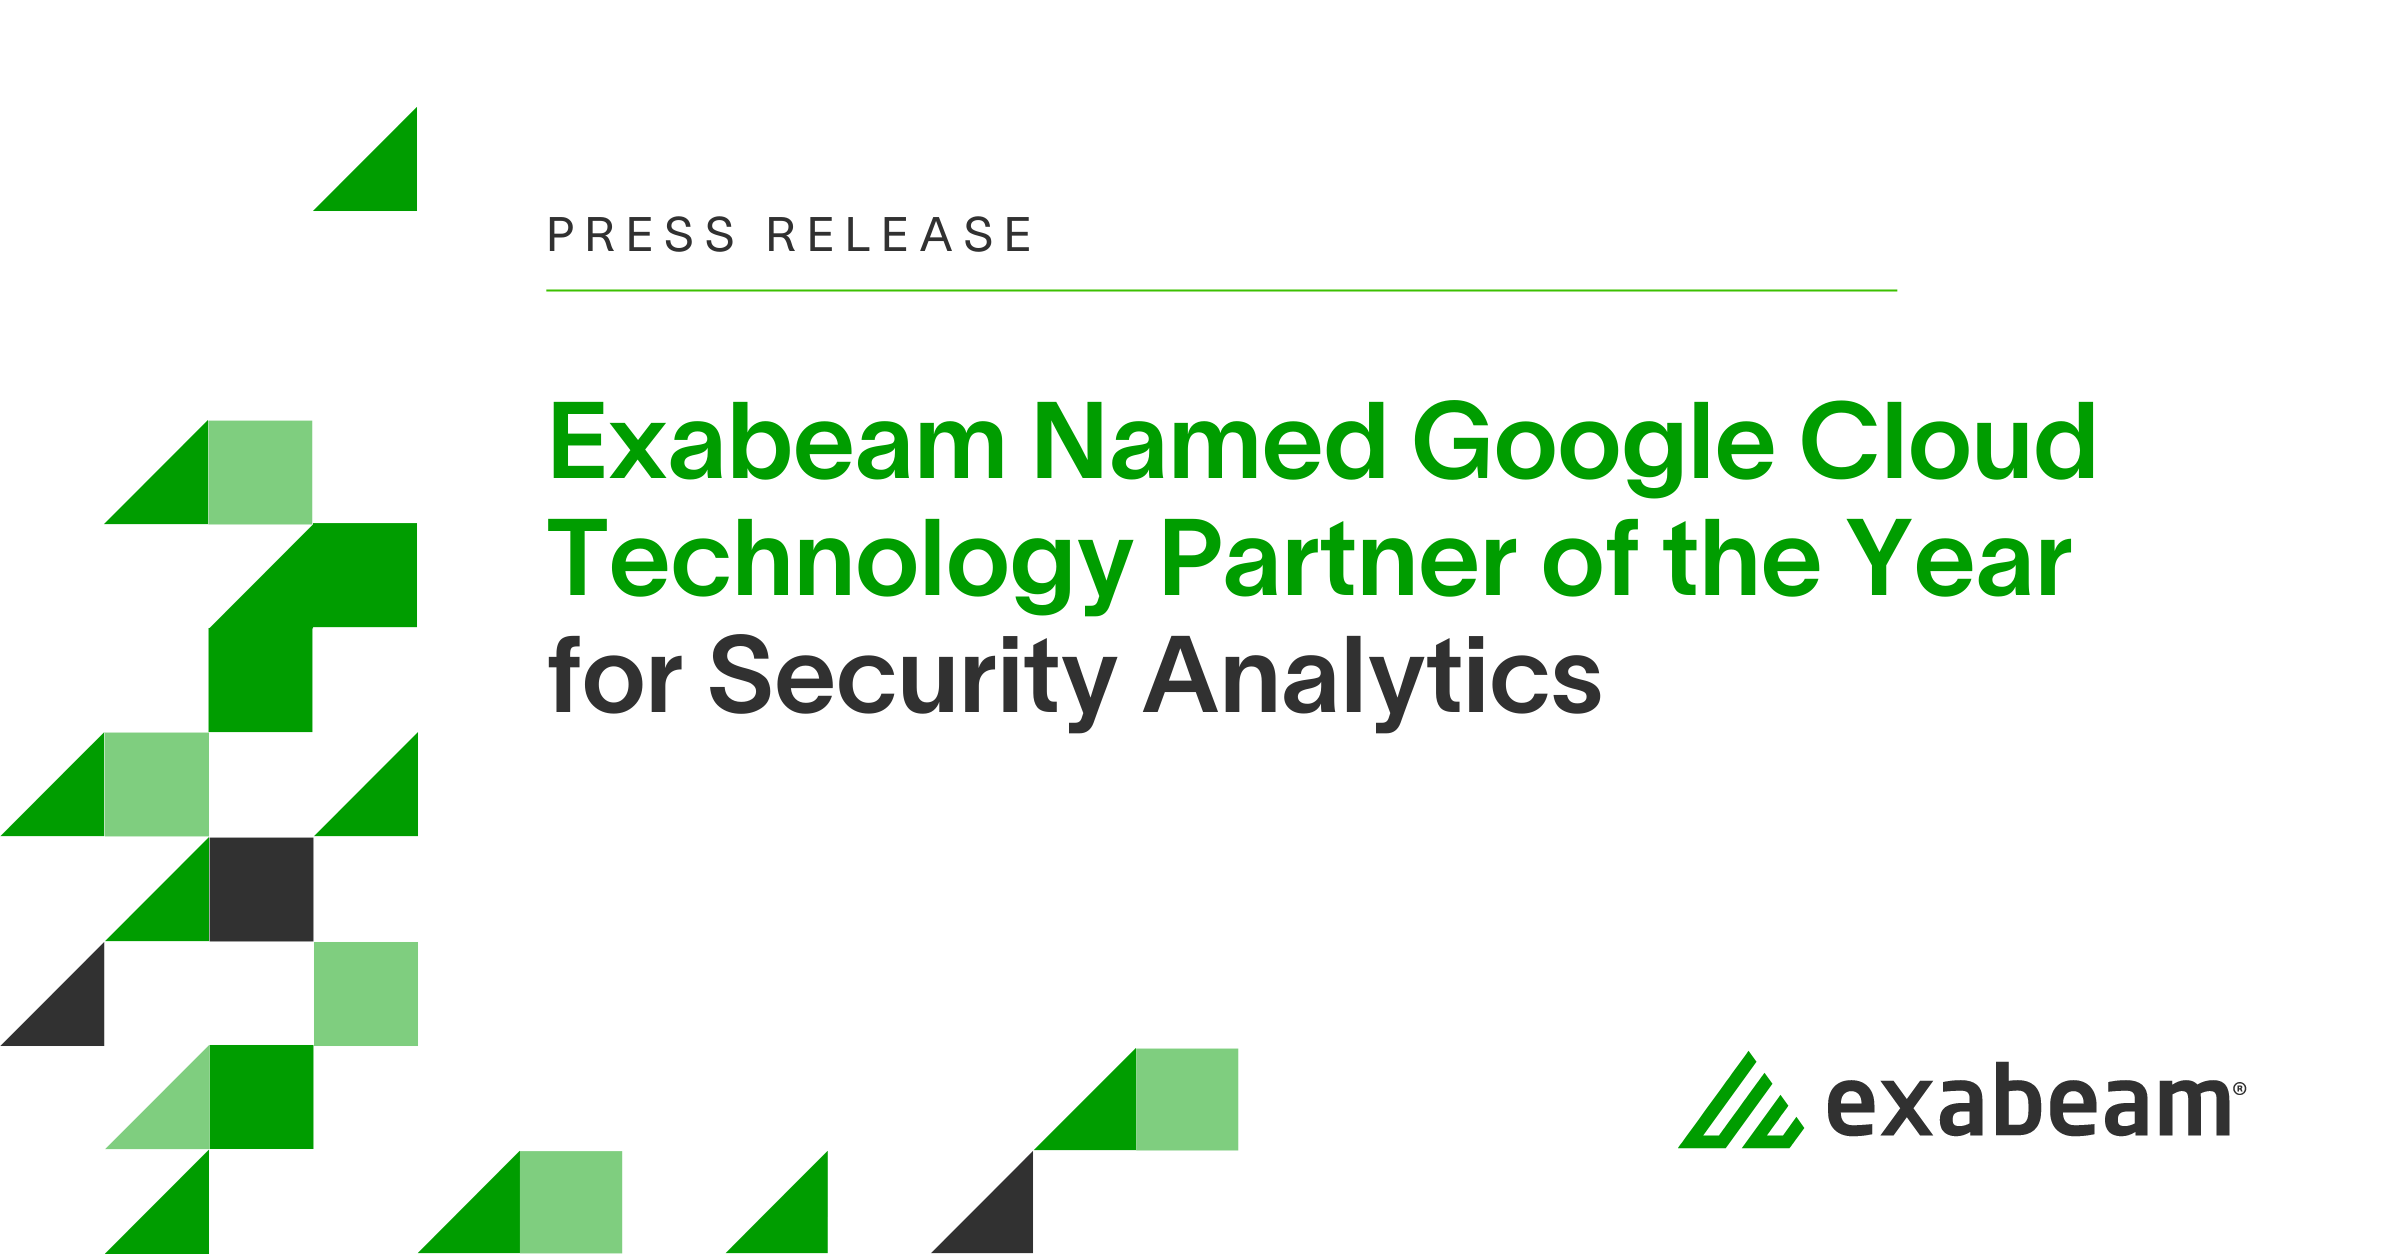 Exabeam Named Google Cloud Technology Partner of the Year for Security Analytics